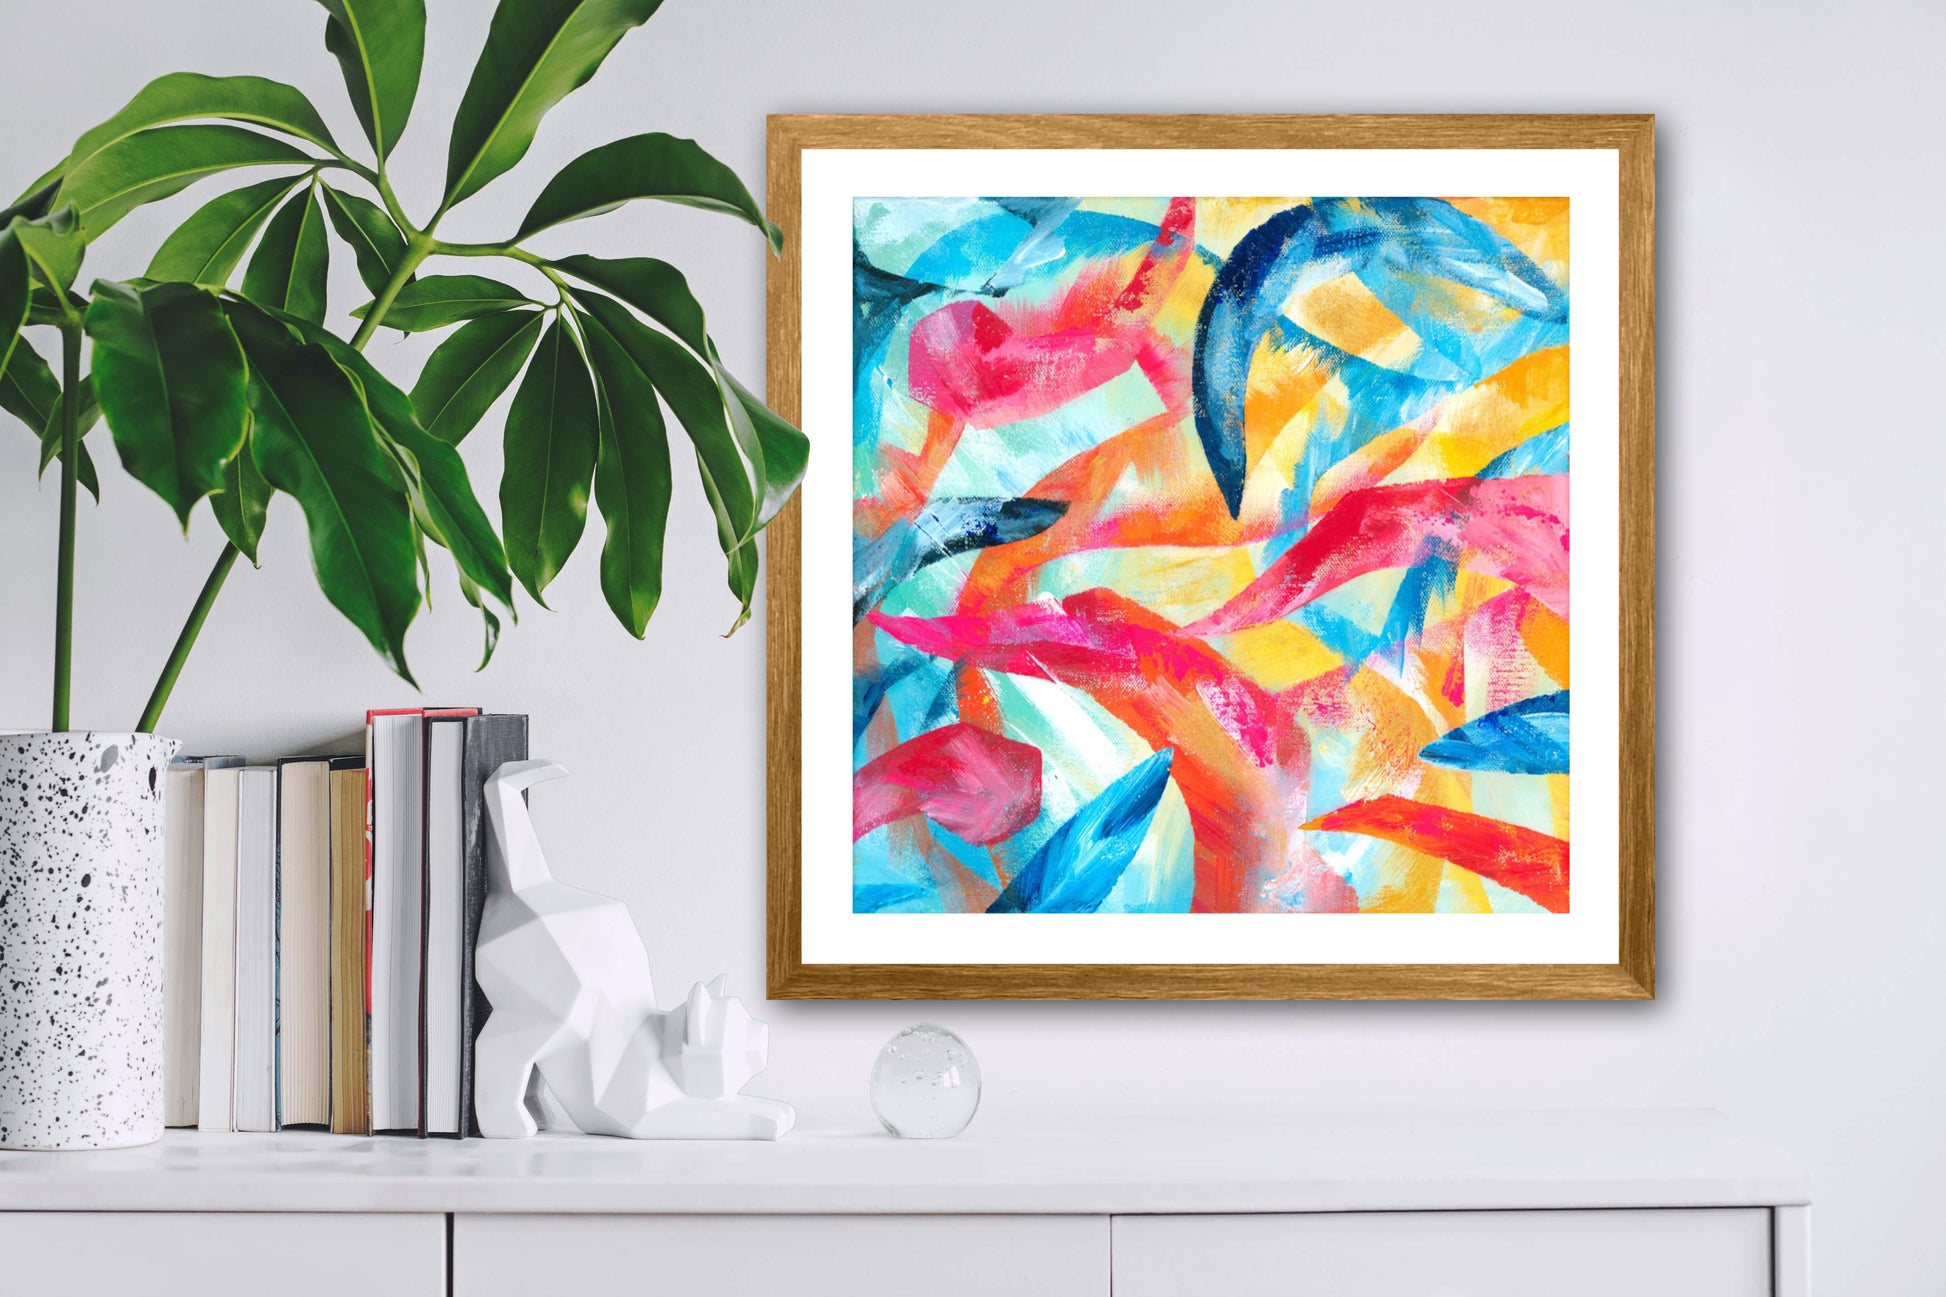 Adventure colourful abstract art print displayed in a natural wood frame on a white wall next to a shelf with a plant and books on it.